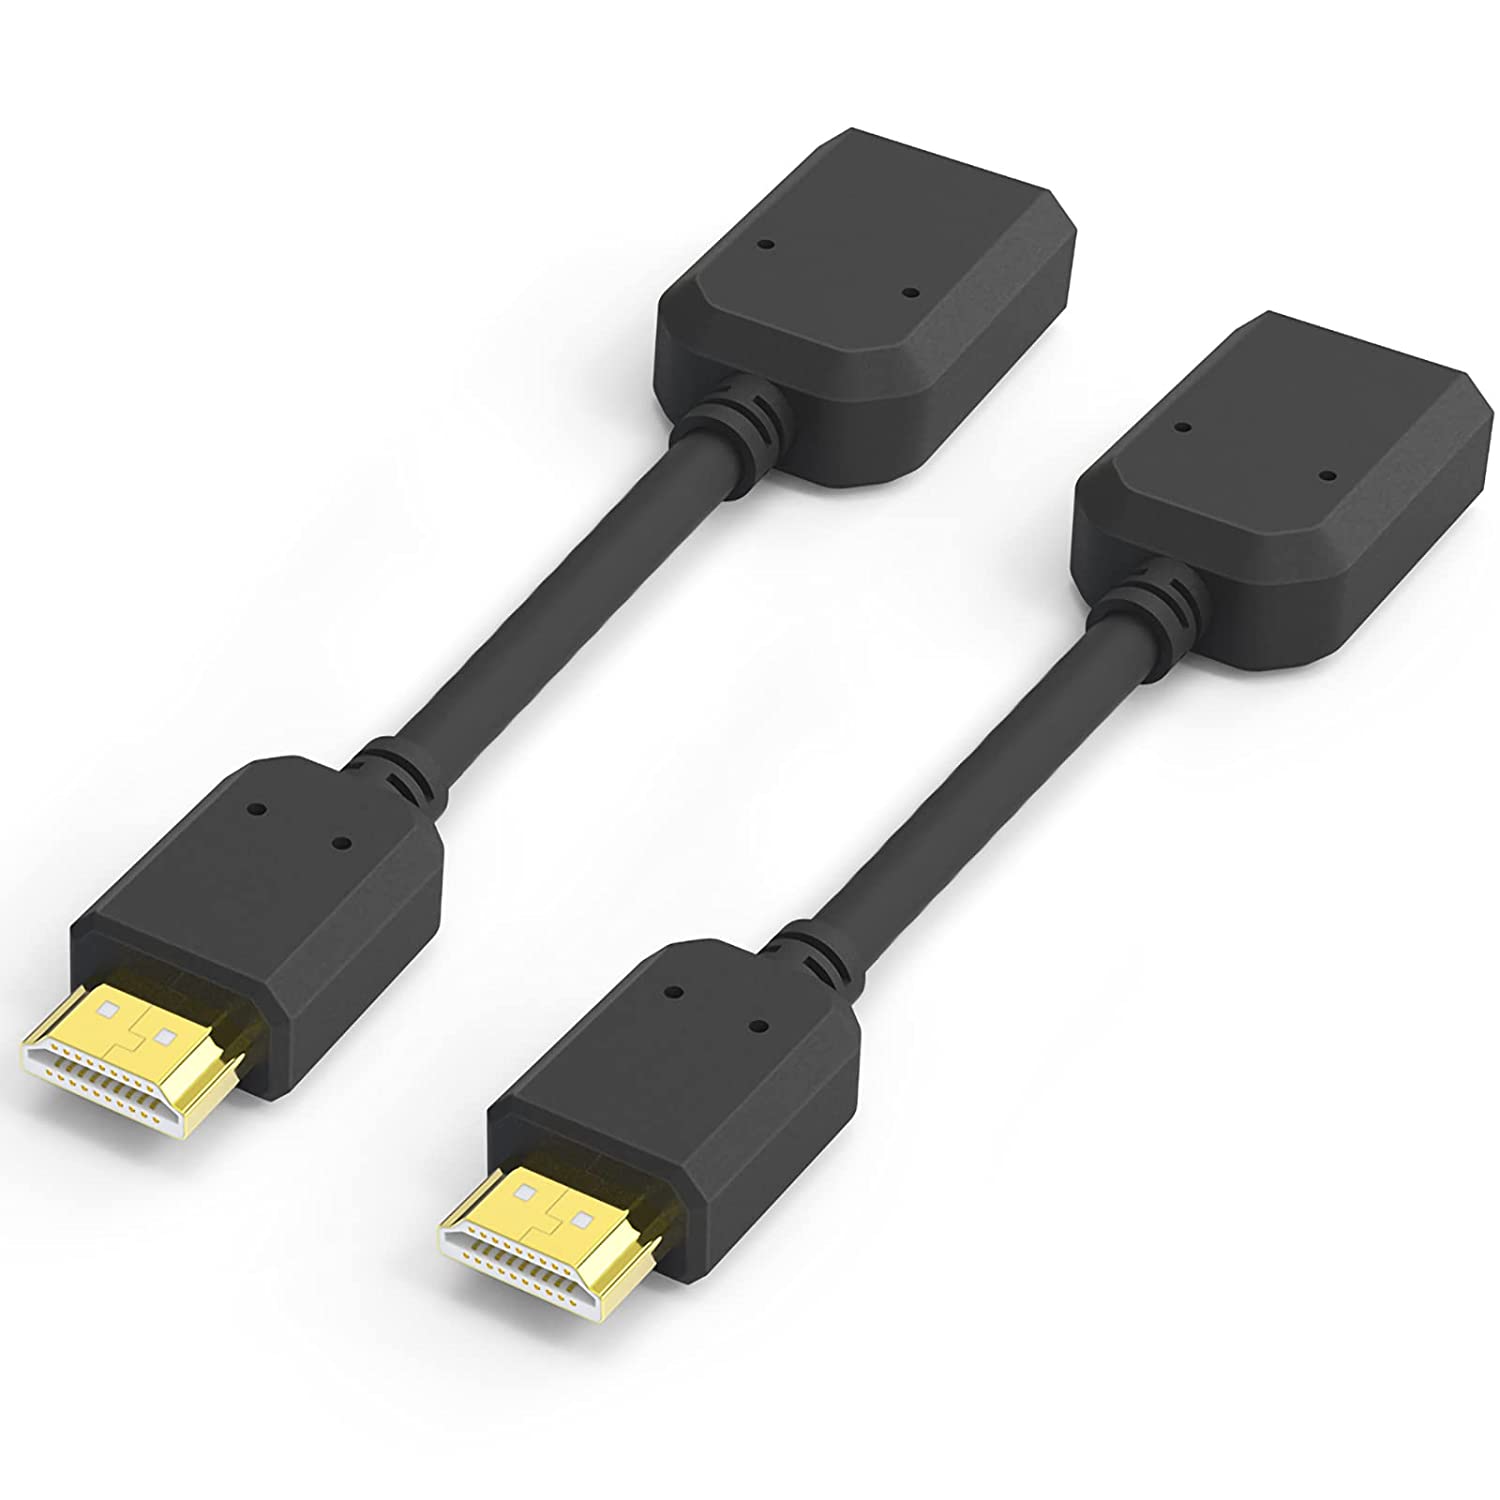  5. Extractme HDMI Extension Cable 